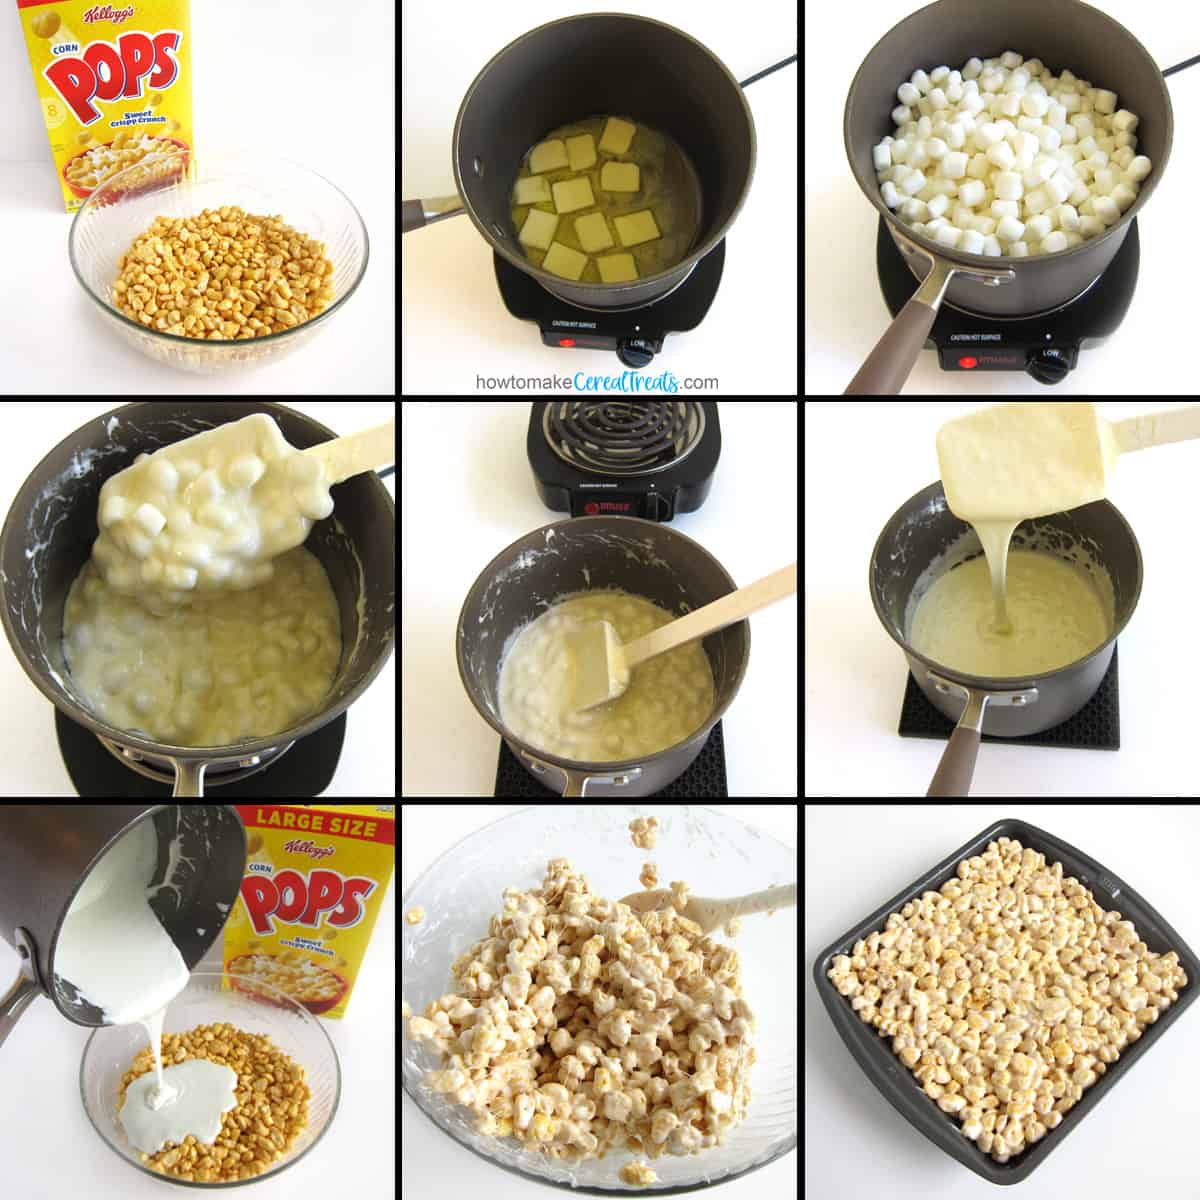 melt butter and marshmallows, mix with Kellogg's Corn Pops Cereal, spread into square pan to make Corn Pops Treats